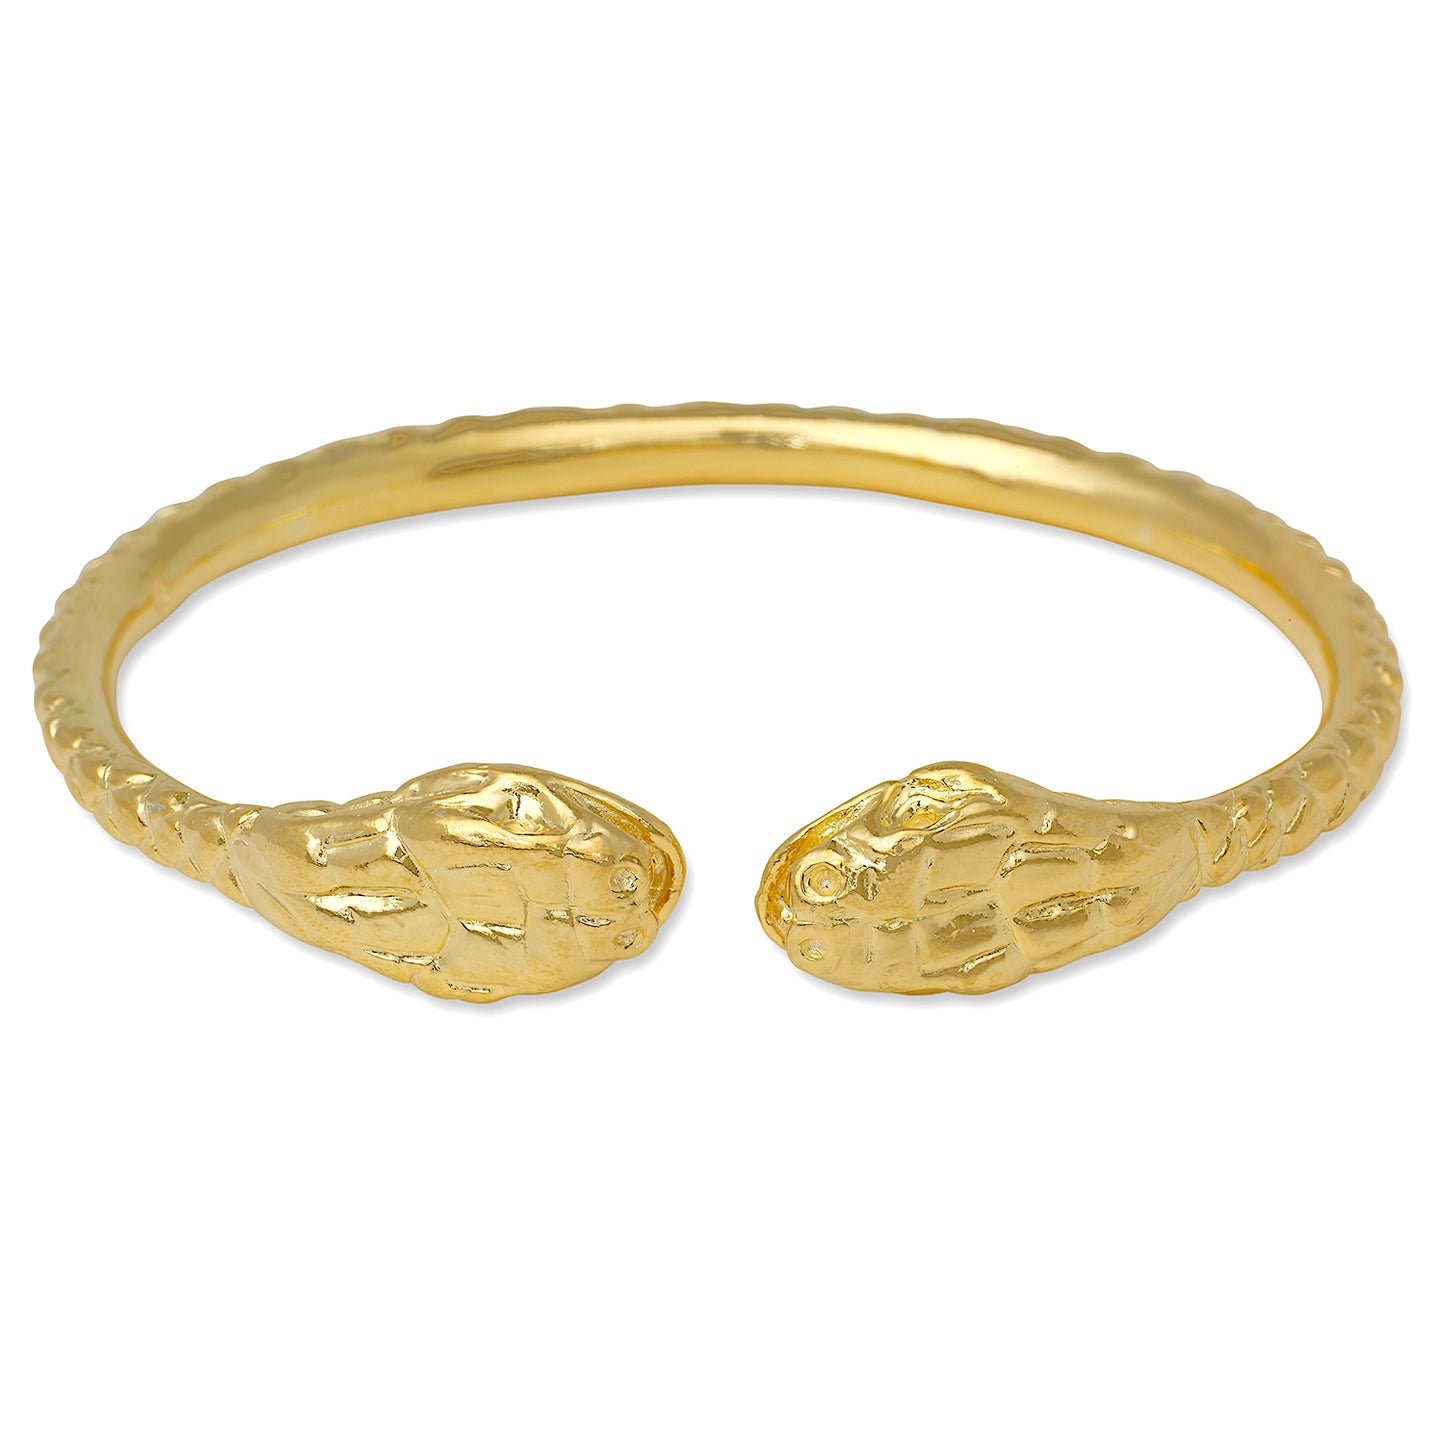 Better Jewelry Thick Snake Ends West Indian Bangle 14K Gold Plated .925 Sterling Silver, 1 piece